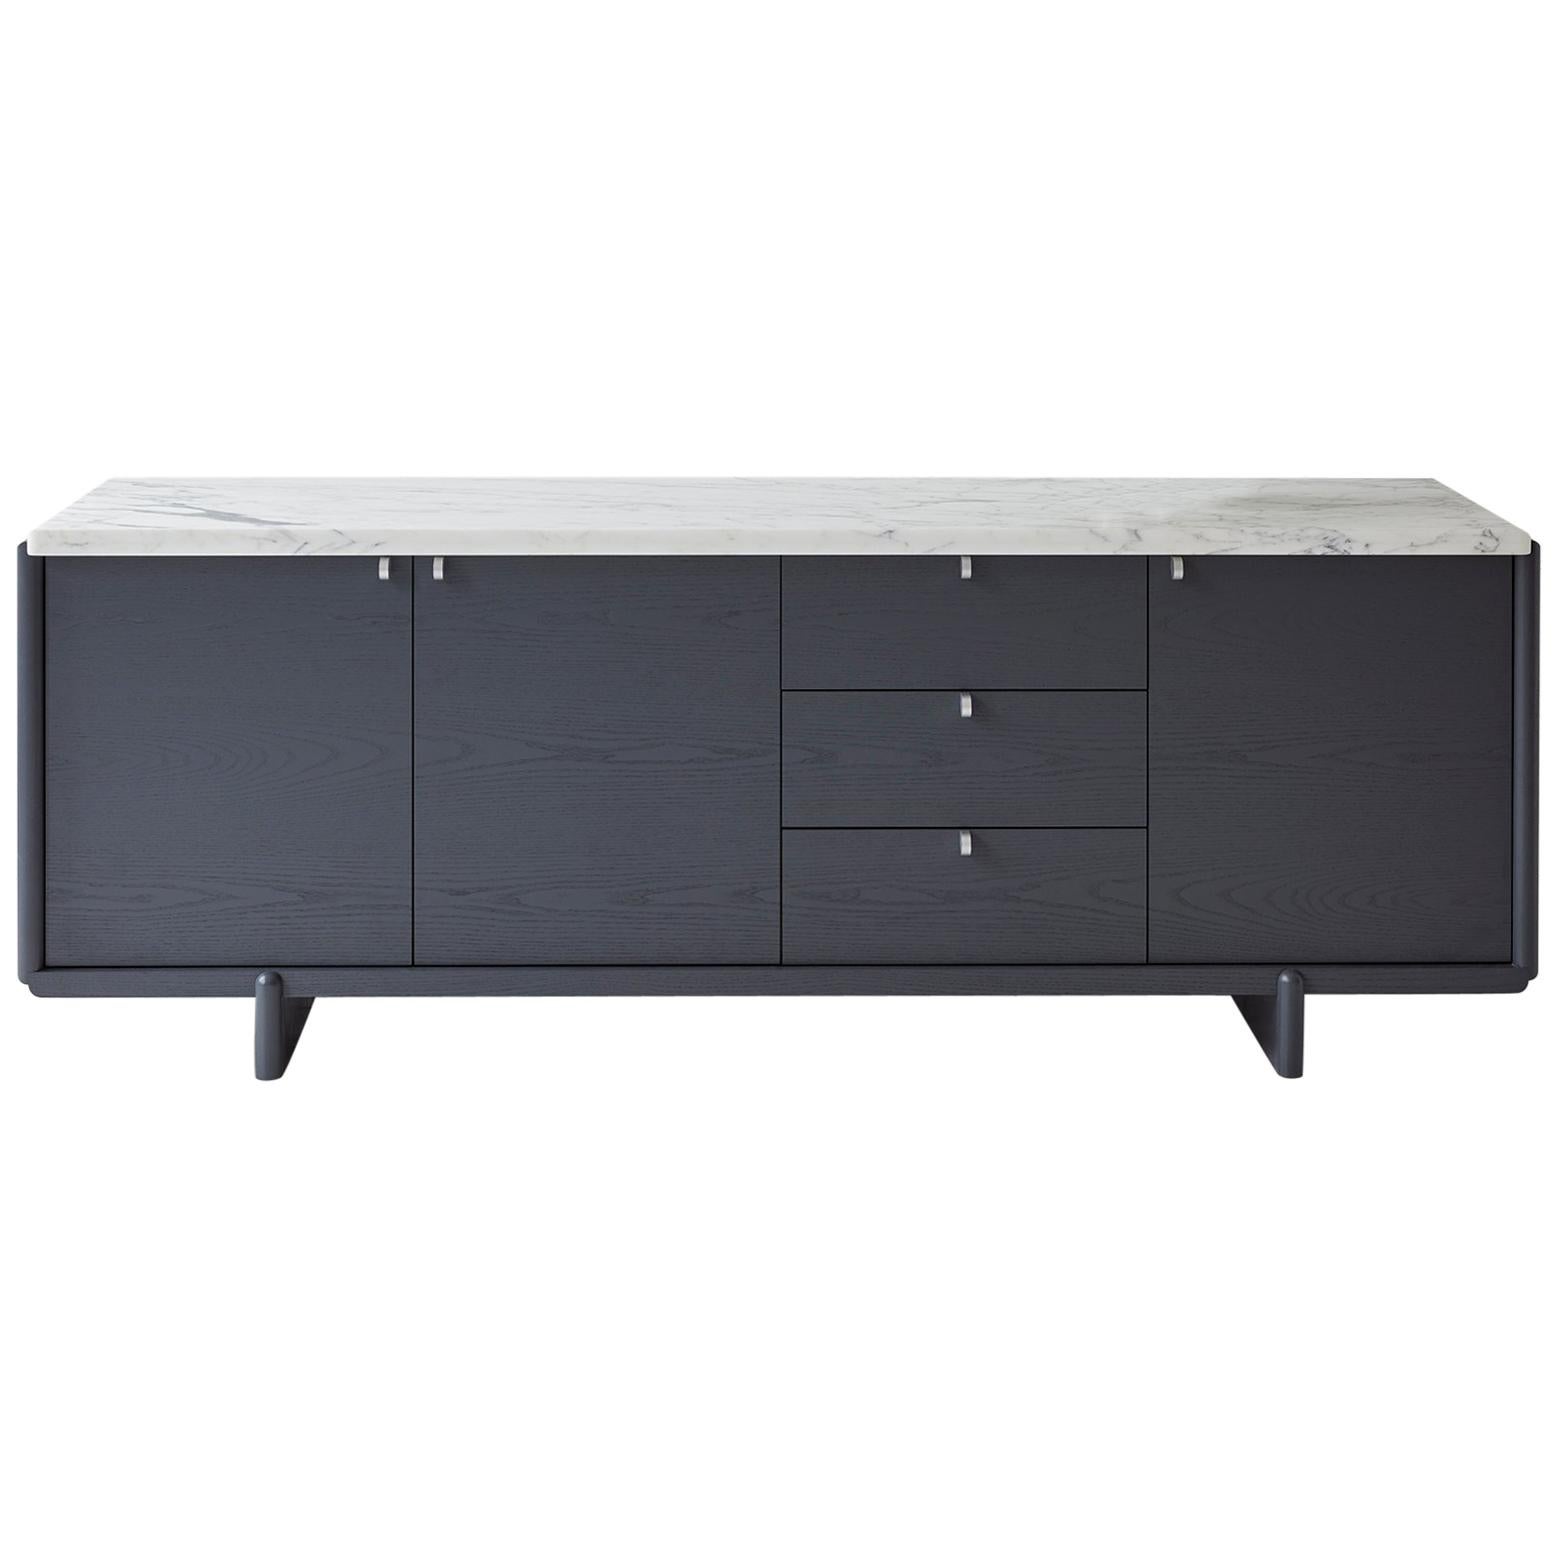 Nocturne Credenza with Slate Lacquer Finish and Calacatta Marble For Sale